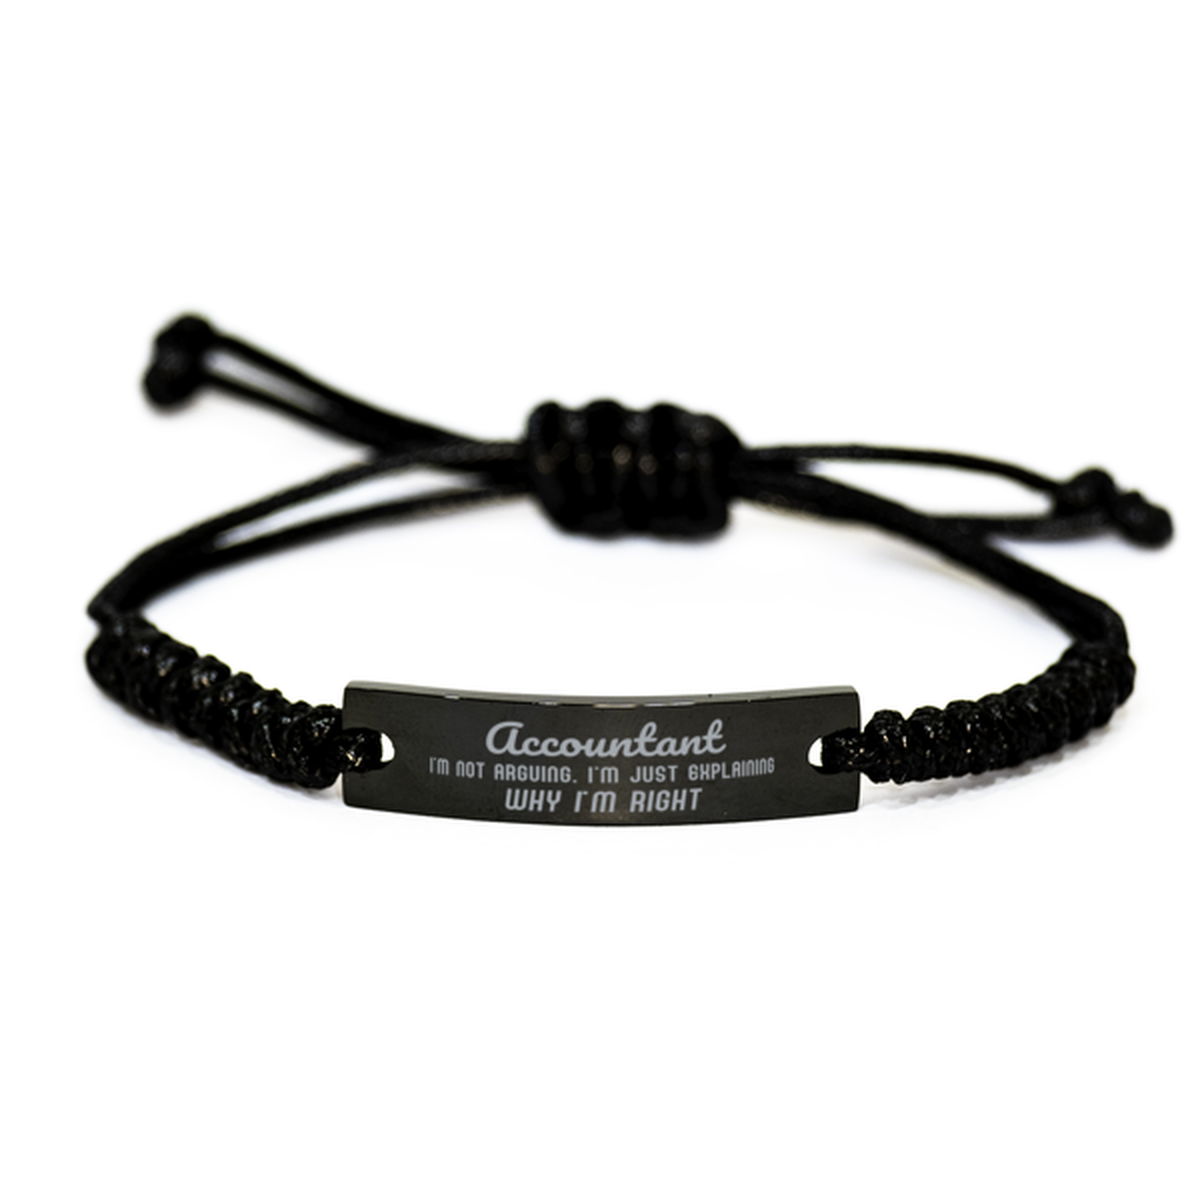 Accountant I'm not Arguing. I'm Just Explaining Why I'm RIGHT Black Rope Bracelet, Funny Saying Quote Accountant Gifts For Accountant Graduation Birthday Christmas Gifts for Men Women Coworker